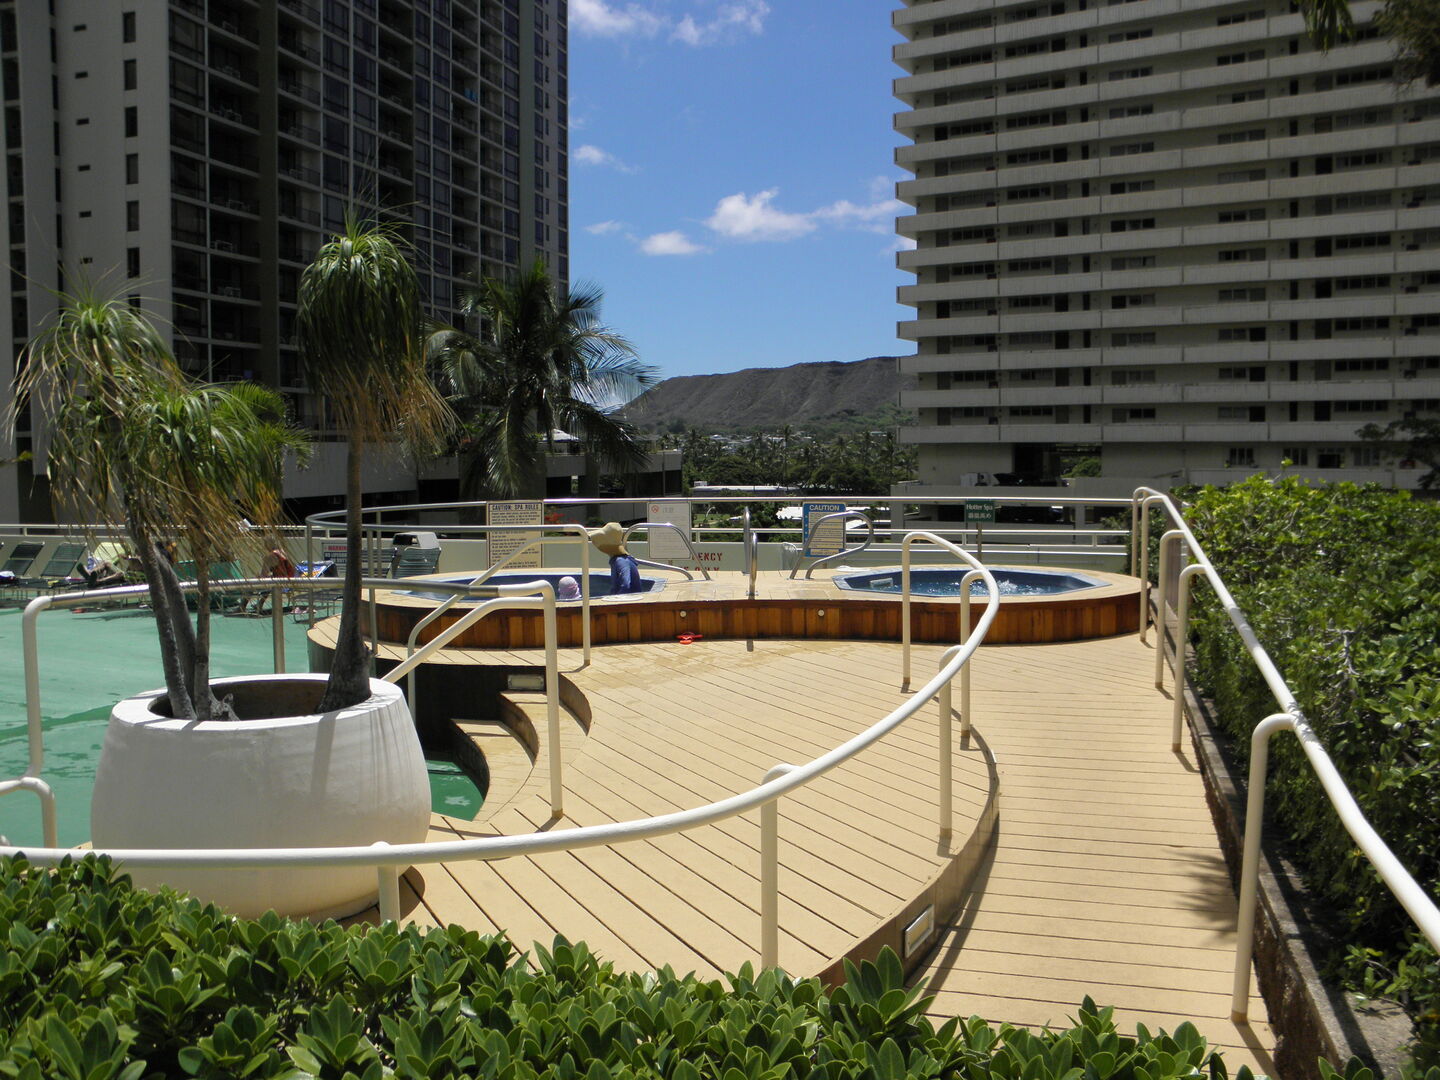 Hot tubs on the recreation deck